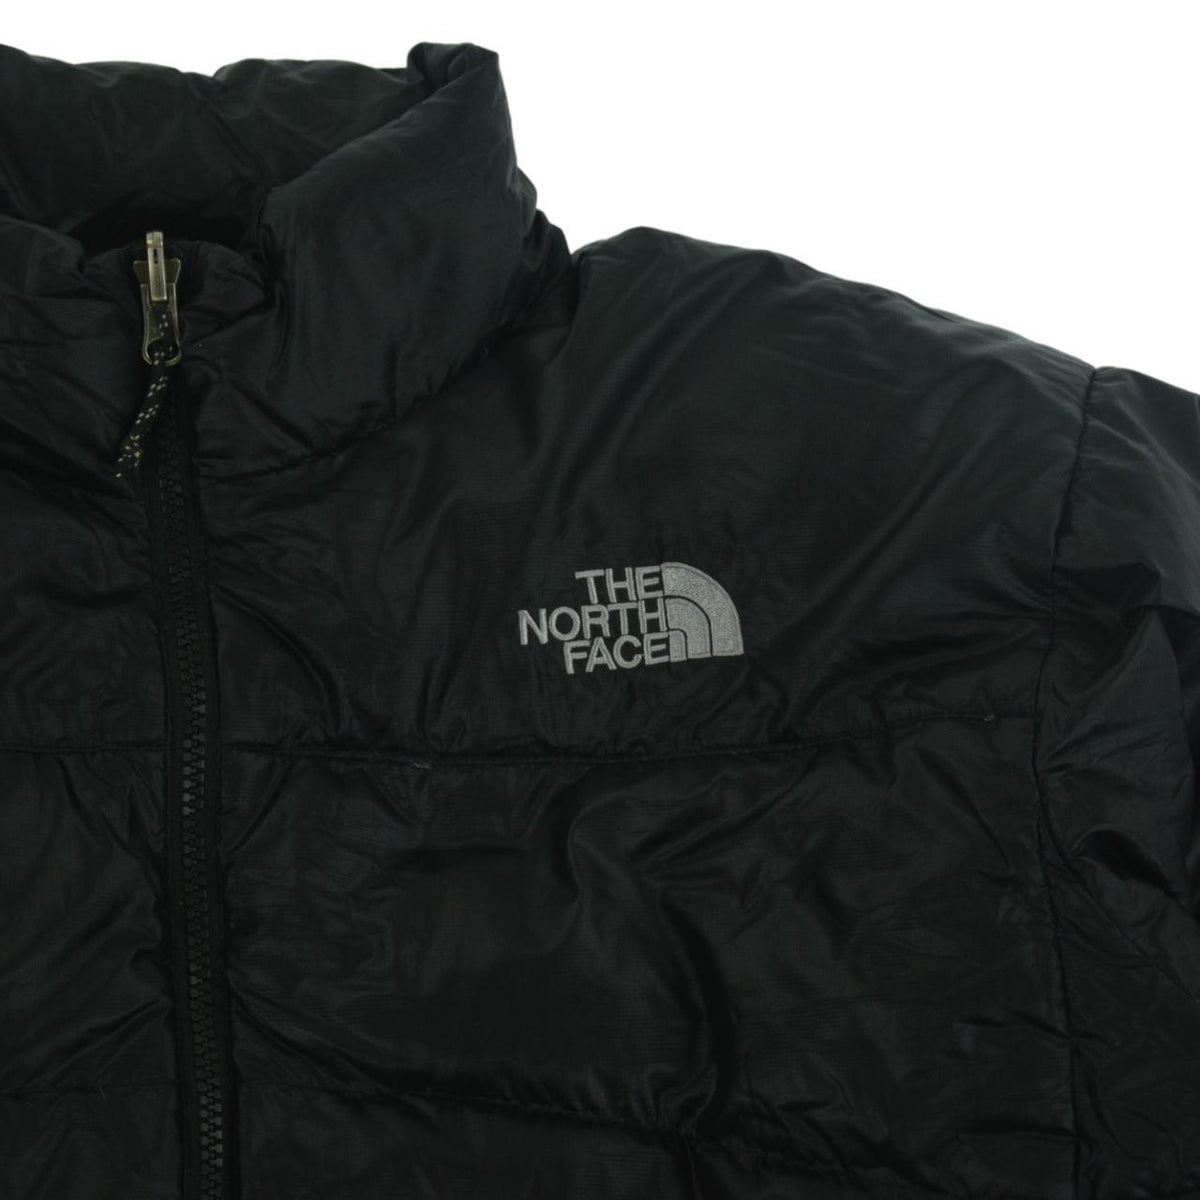 Vintage North Face Puffer Jacket Size M